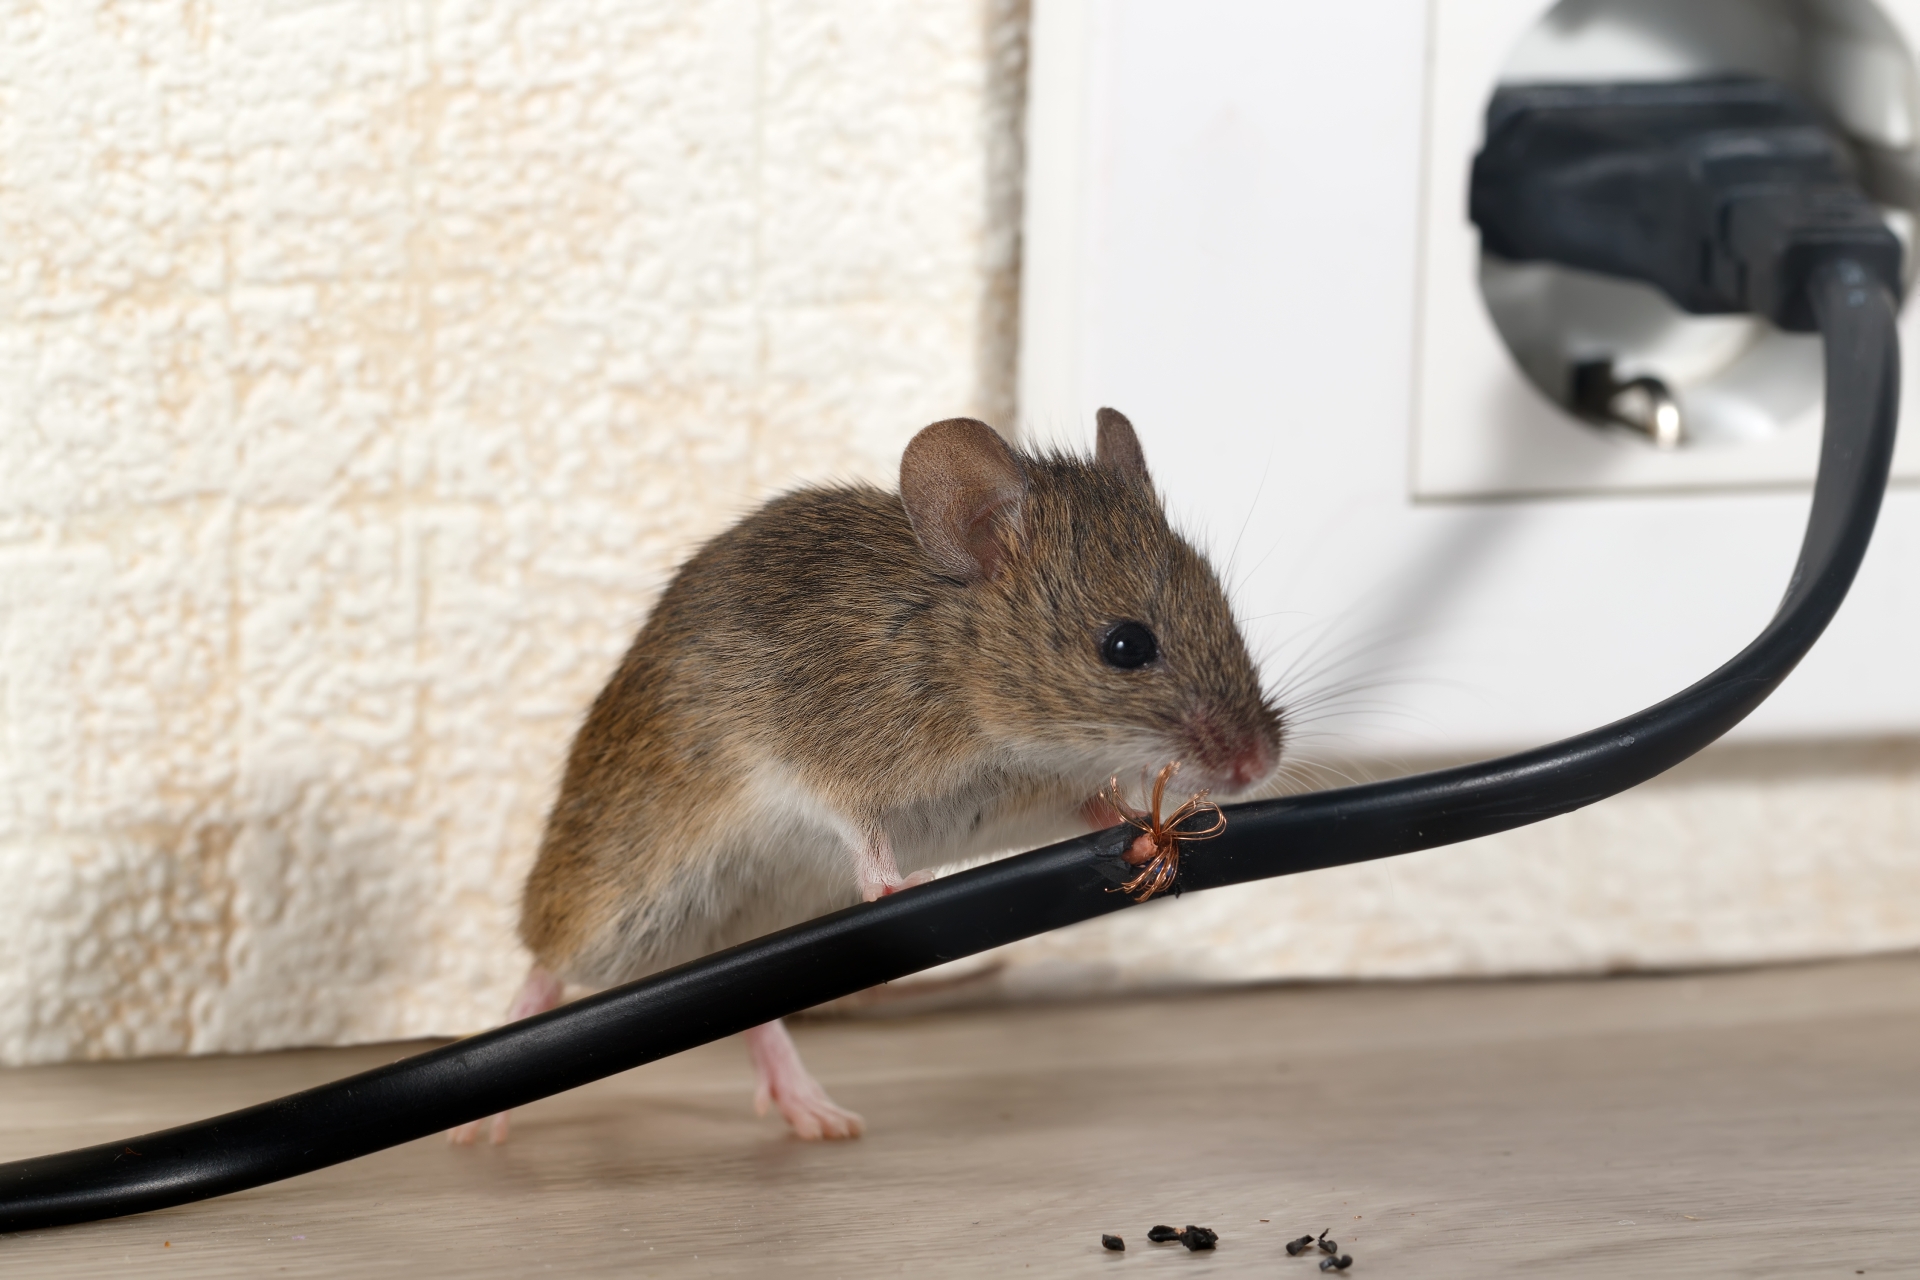 Mice Infestation, Pest Control in Broxbourne, EN10. Call Now 020 8166 9746